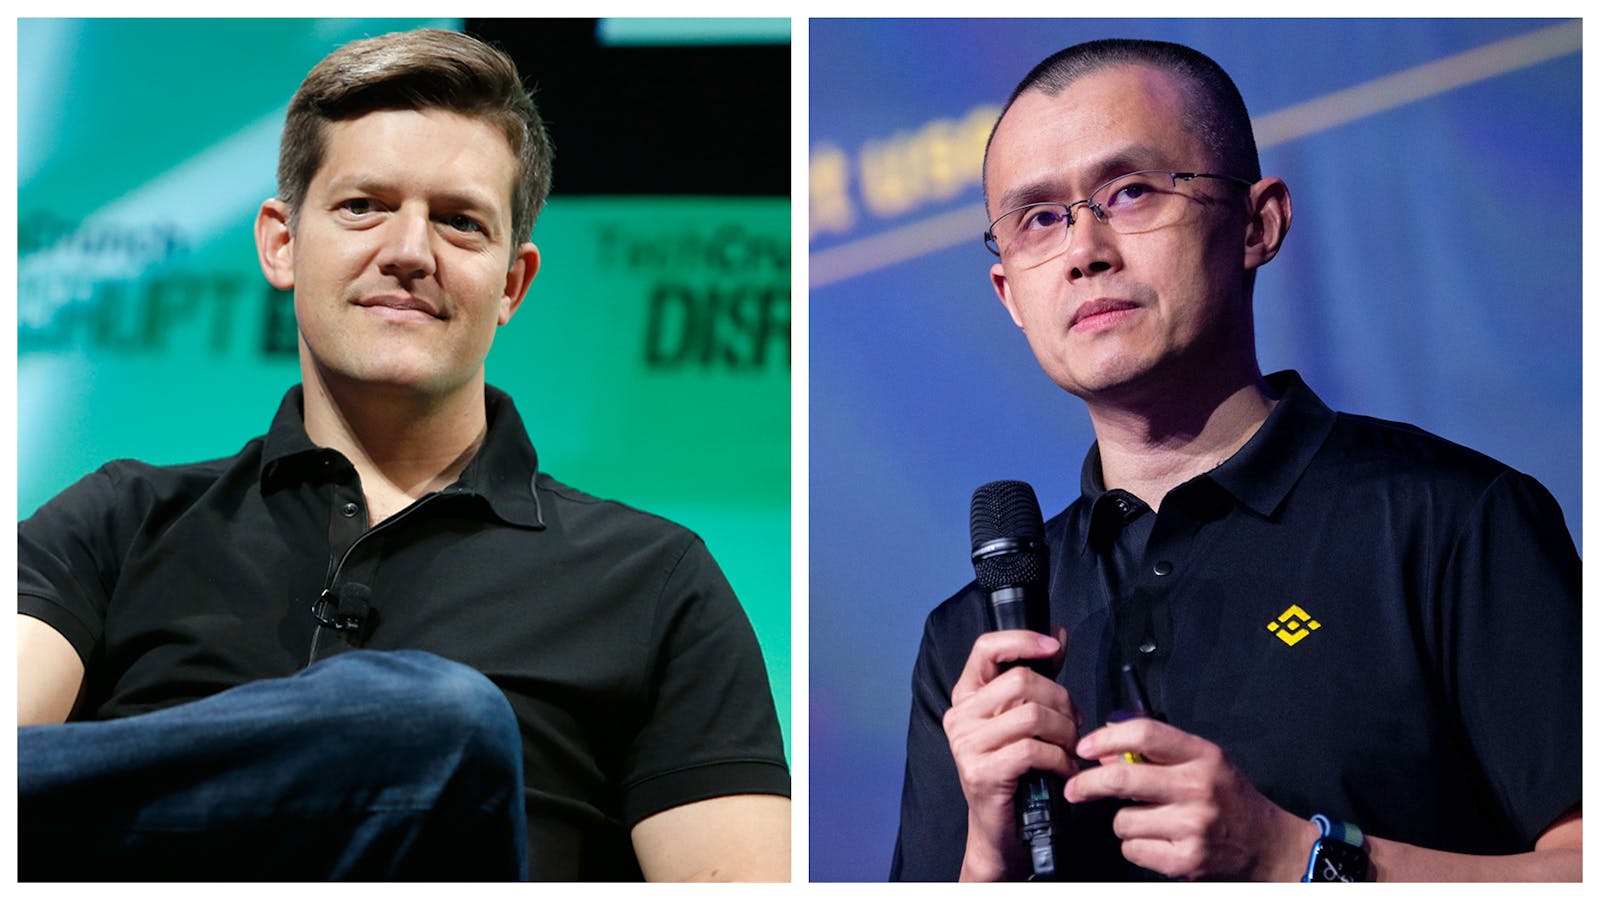 Roelof Botha, partner at Sequoia Capital, and Zhao Changpeng, founder of Binance. Photos by Getty Images and Bloomberg.